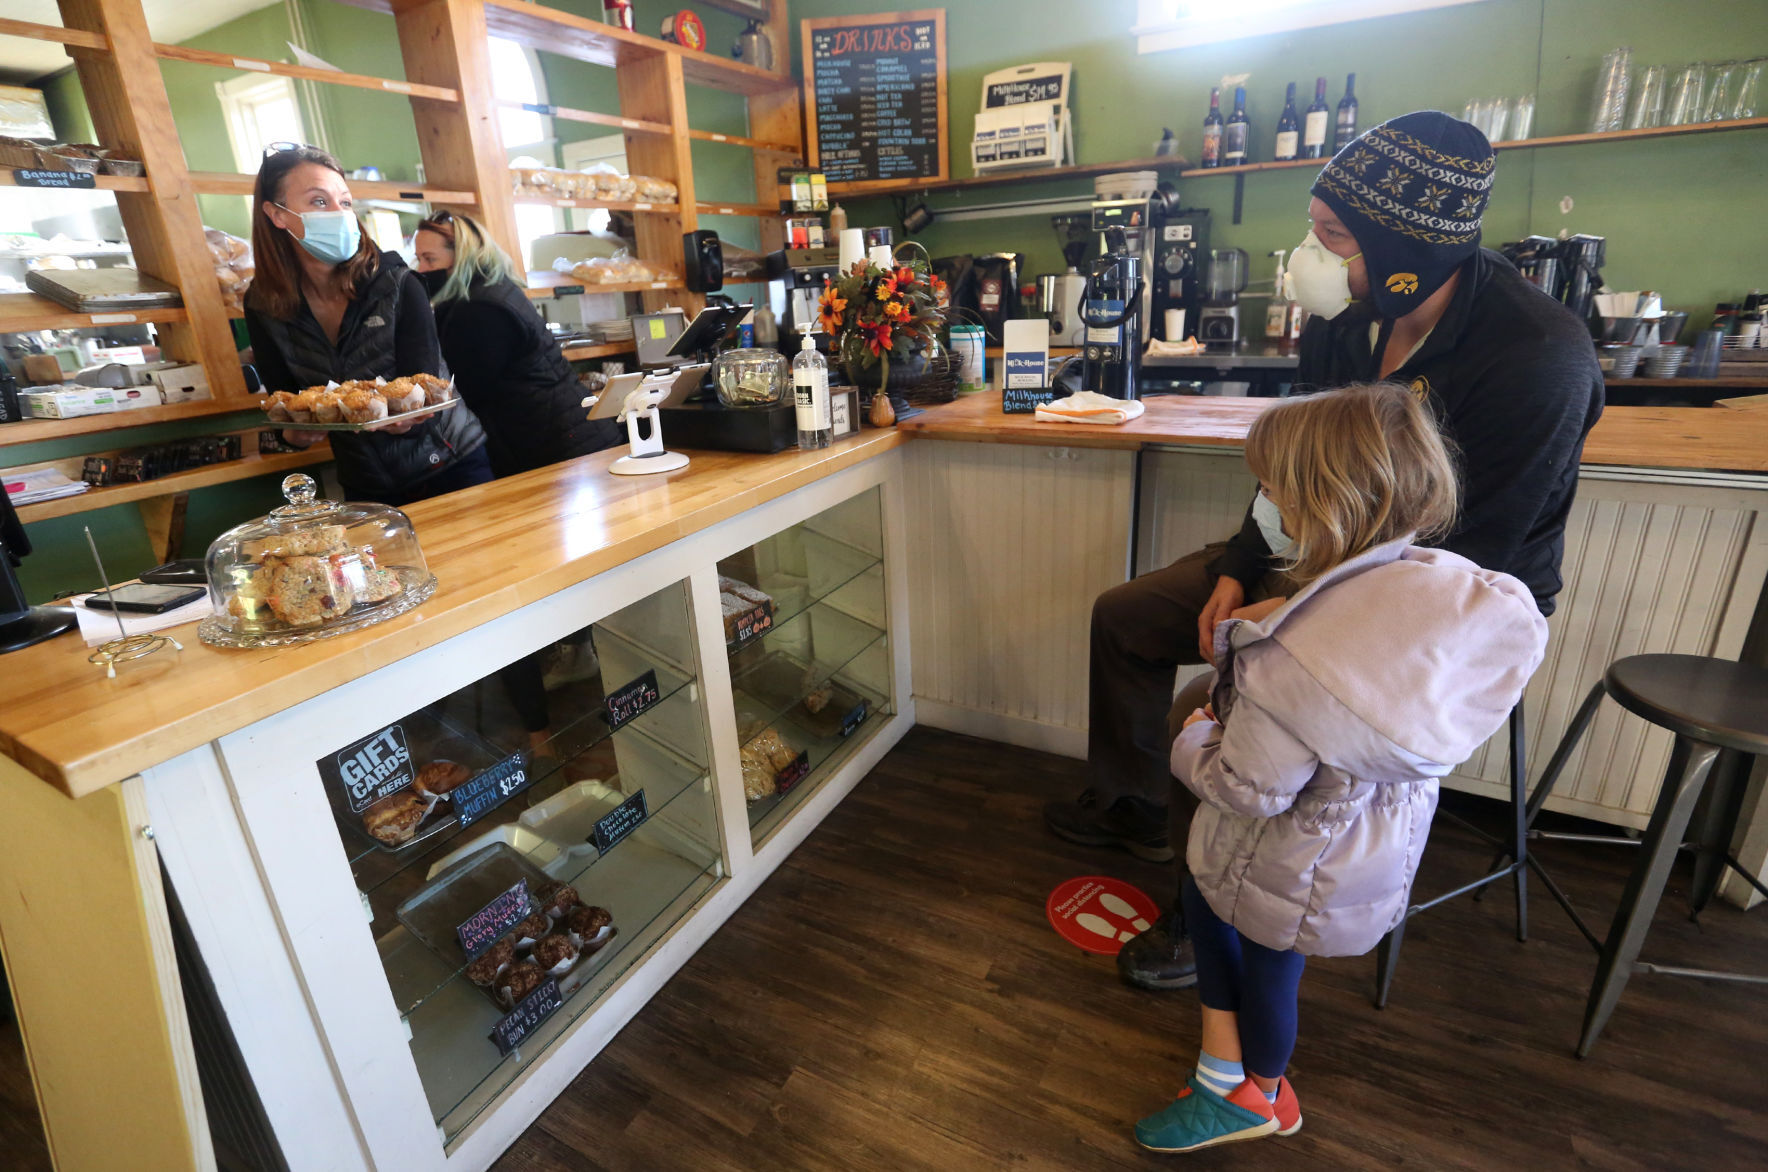 Owner Ali Fuller talks with Bob Heath and his daughter, Grace, 6, both of Dubuque, at Milk House Artisan Eatery, Baked Goods & Catering in Dubuque on Wednesday, Nov. 18, 2020. PHOTO CREDIT: JESSICA REILLY